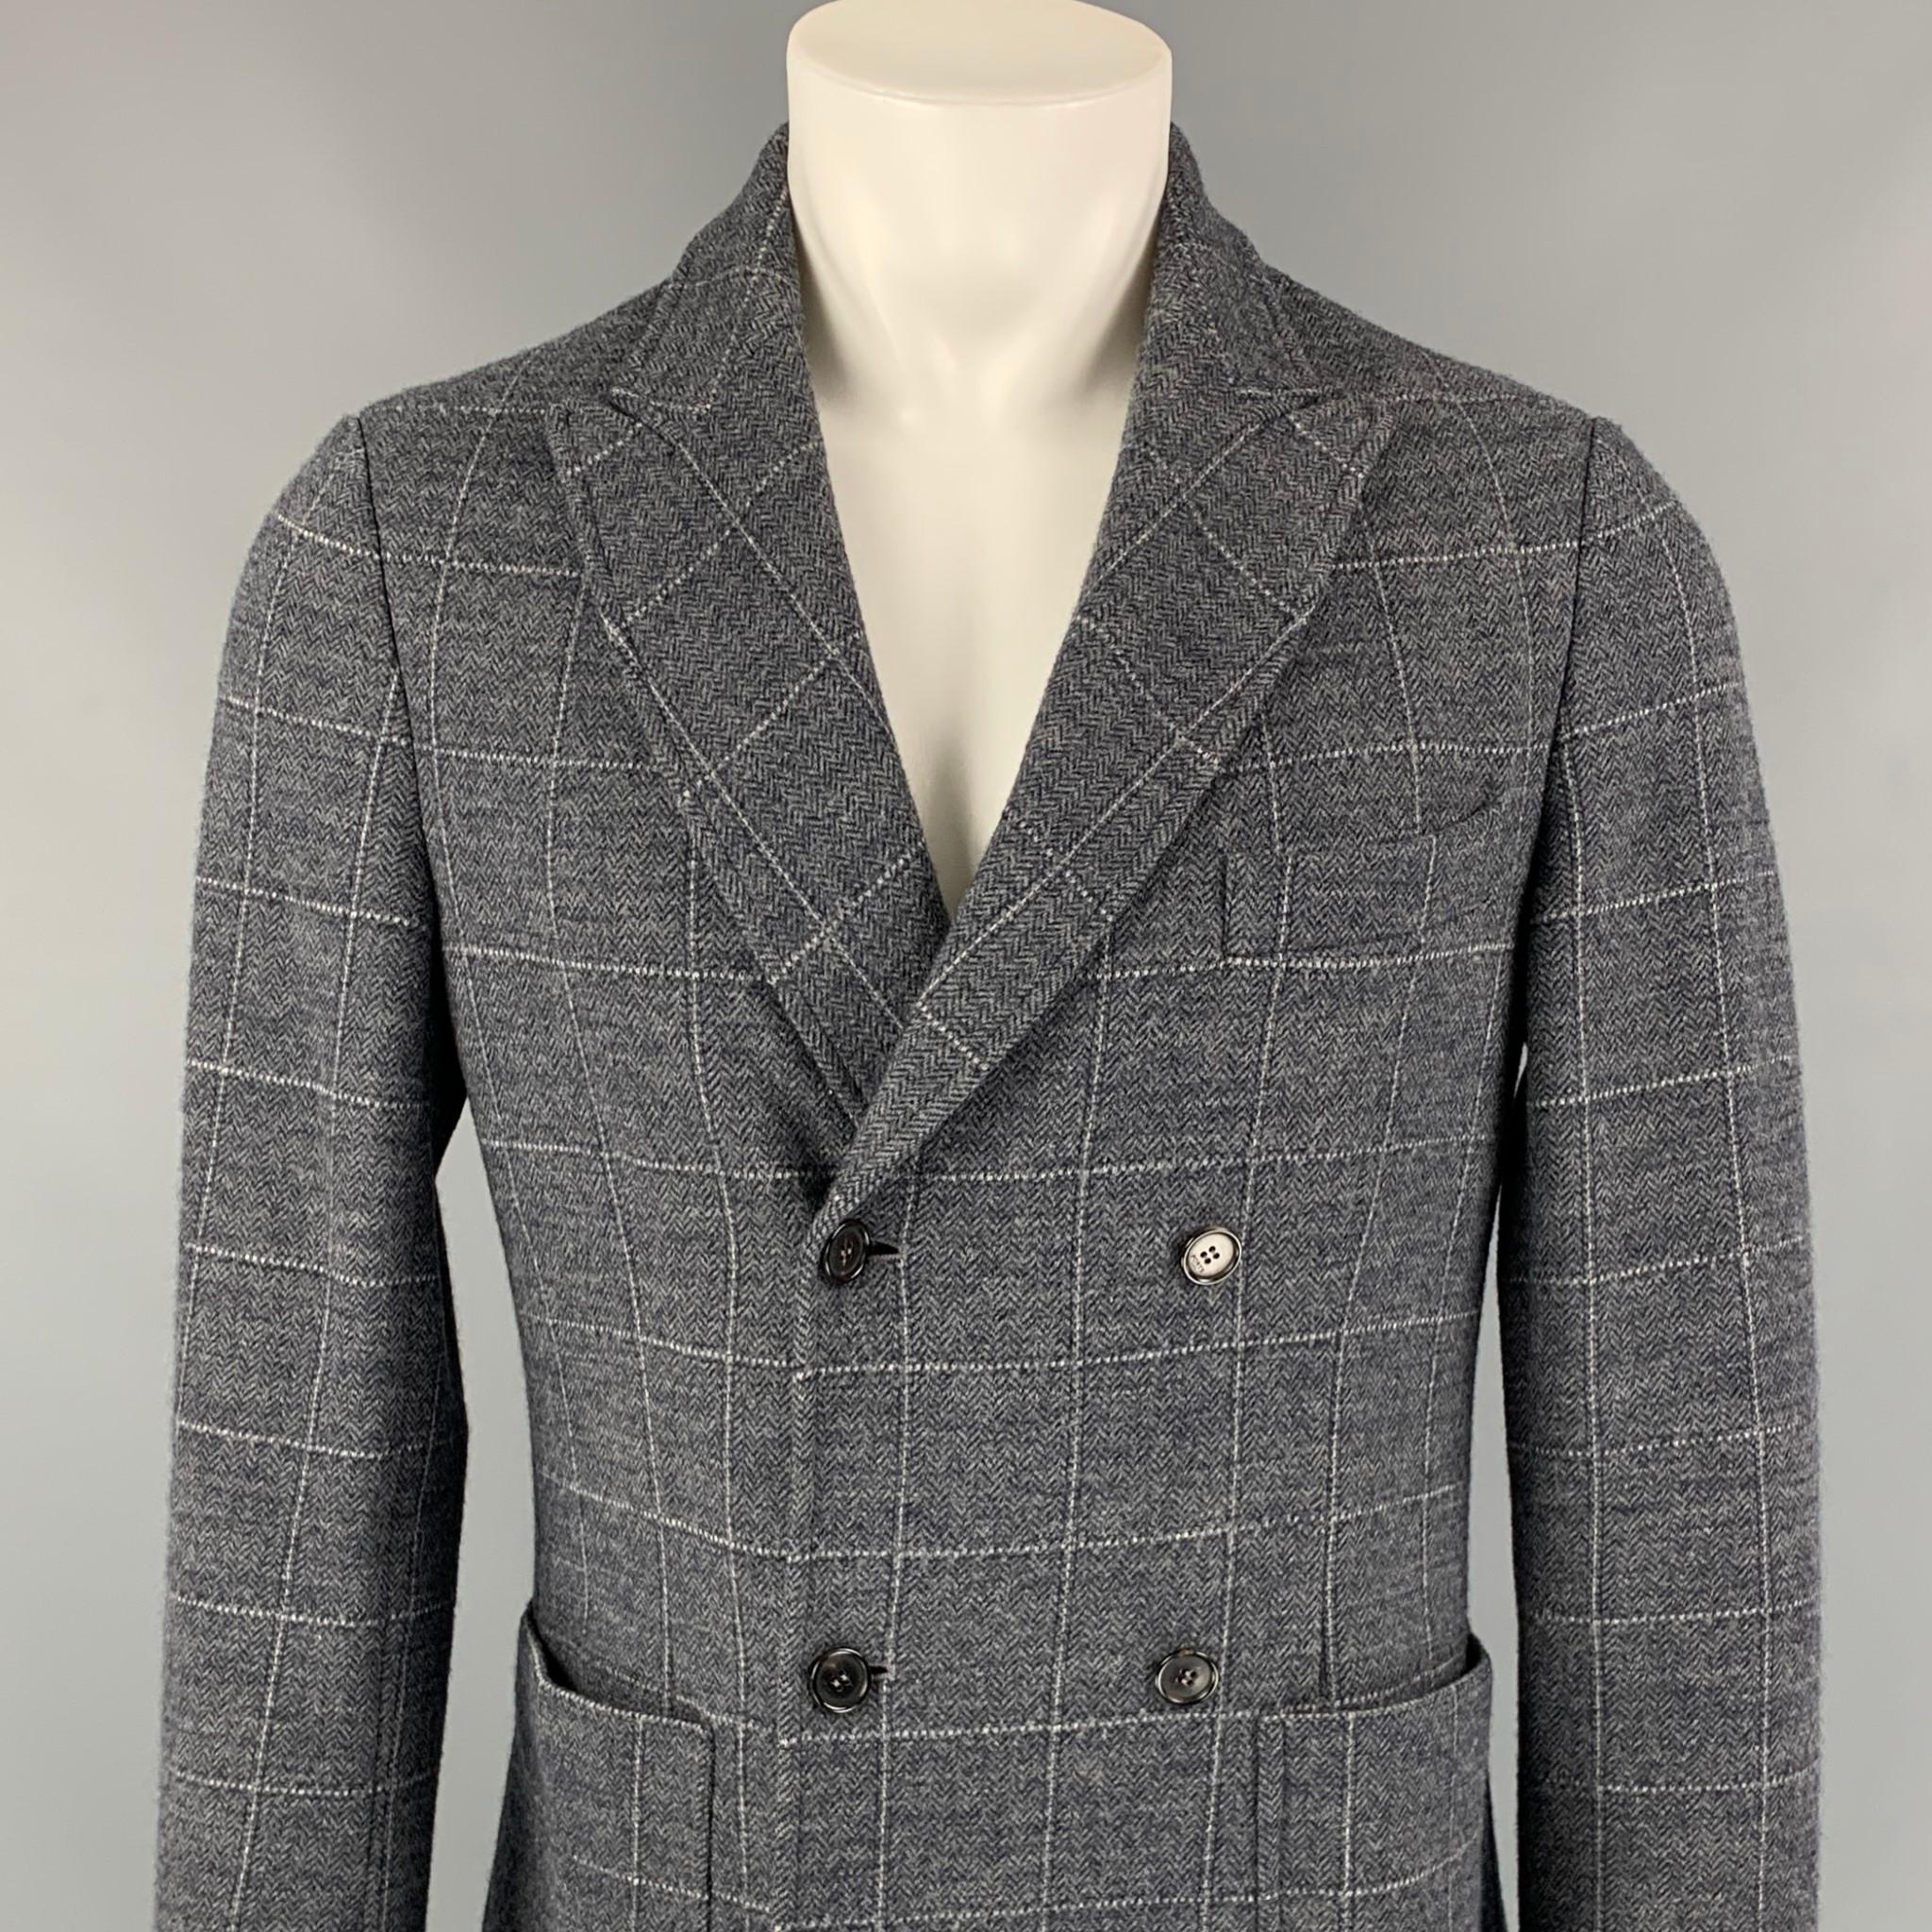 PORTS 1961 jacket comes in a grey & cream window pane wool blend with a half liner featuring a peak lapel, patch pockets, and a double breasted closure. Made in Italy. 

Excellent Pre-Owned Condition.
Marked: S

Measurements:

Shoulder: 17